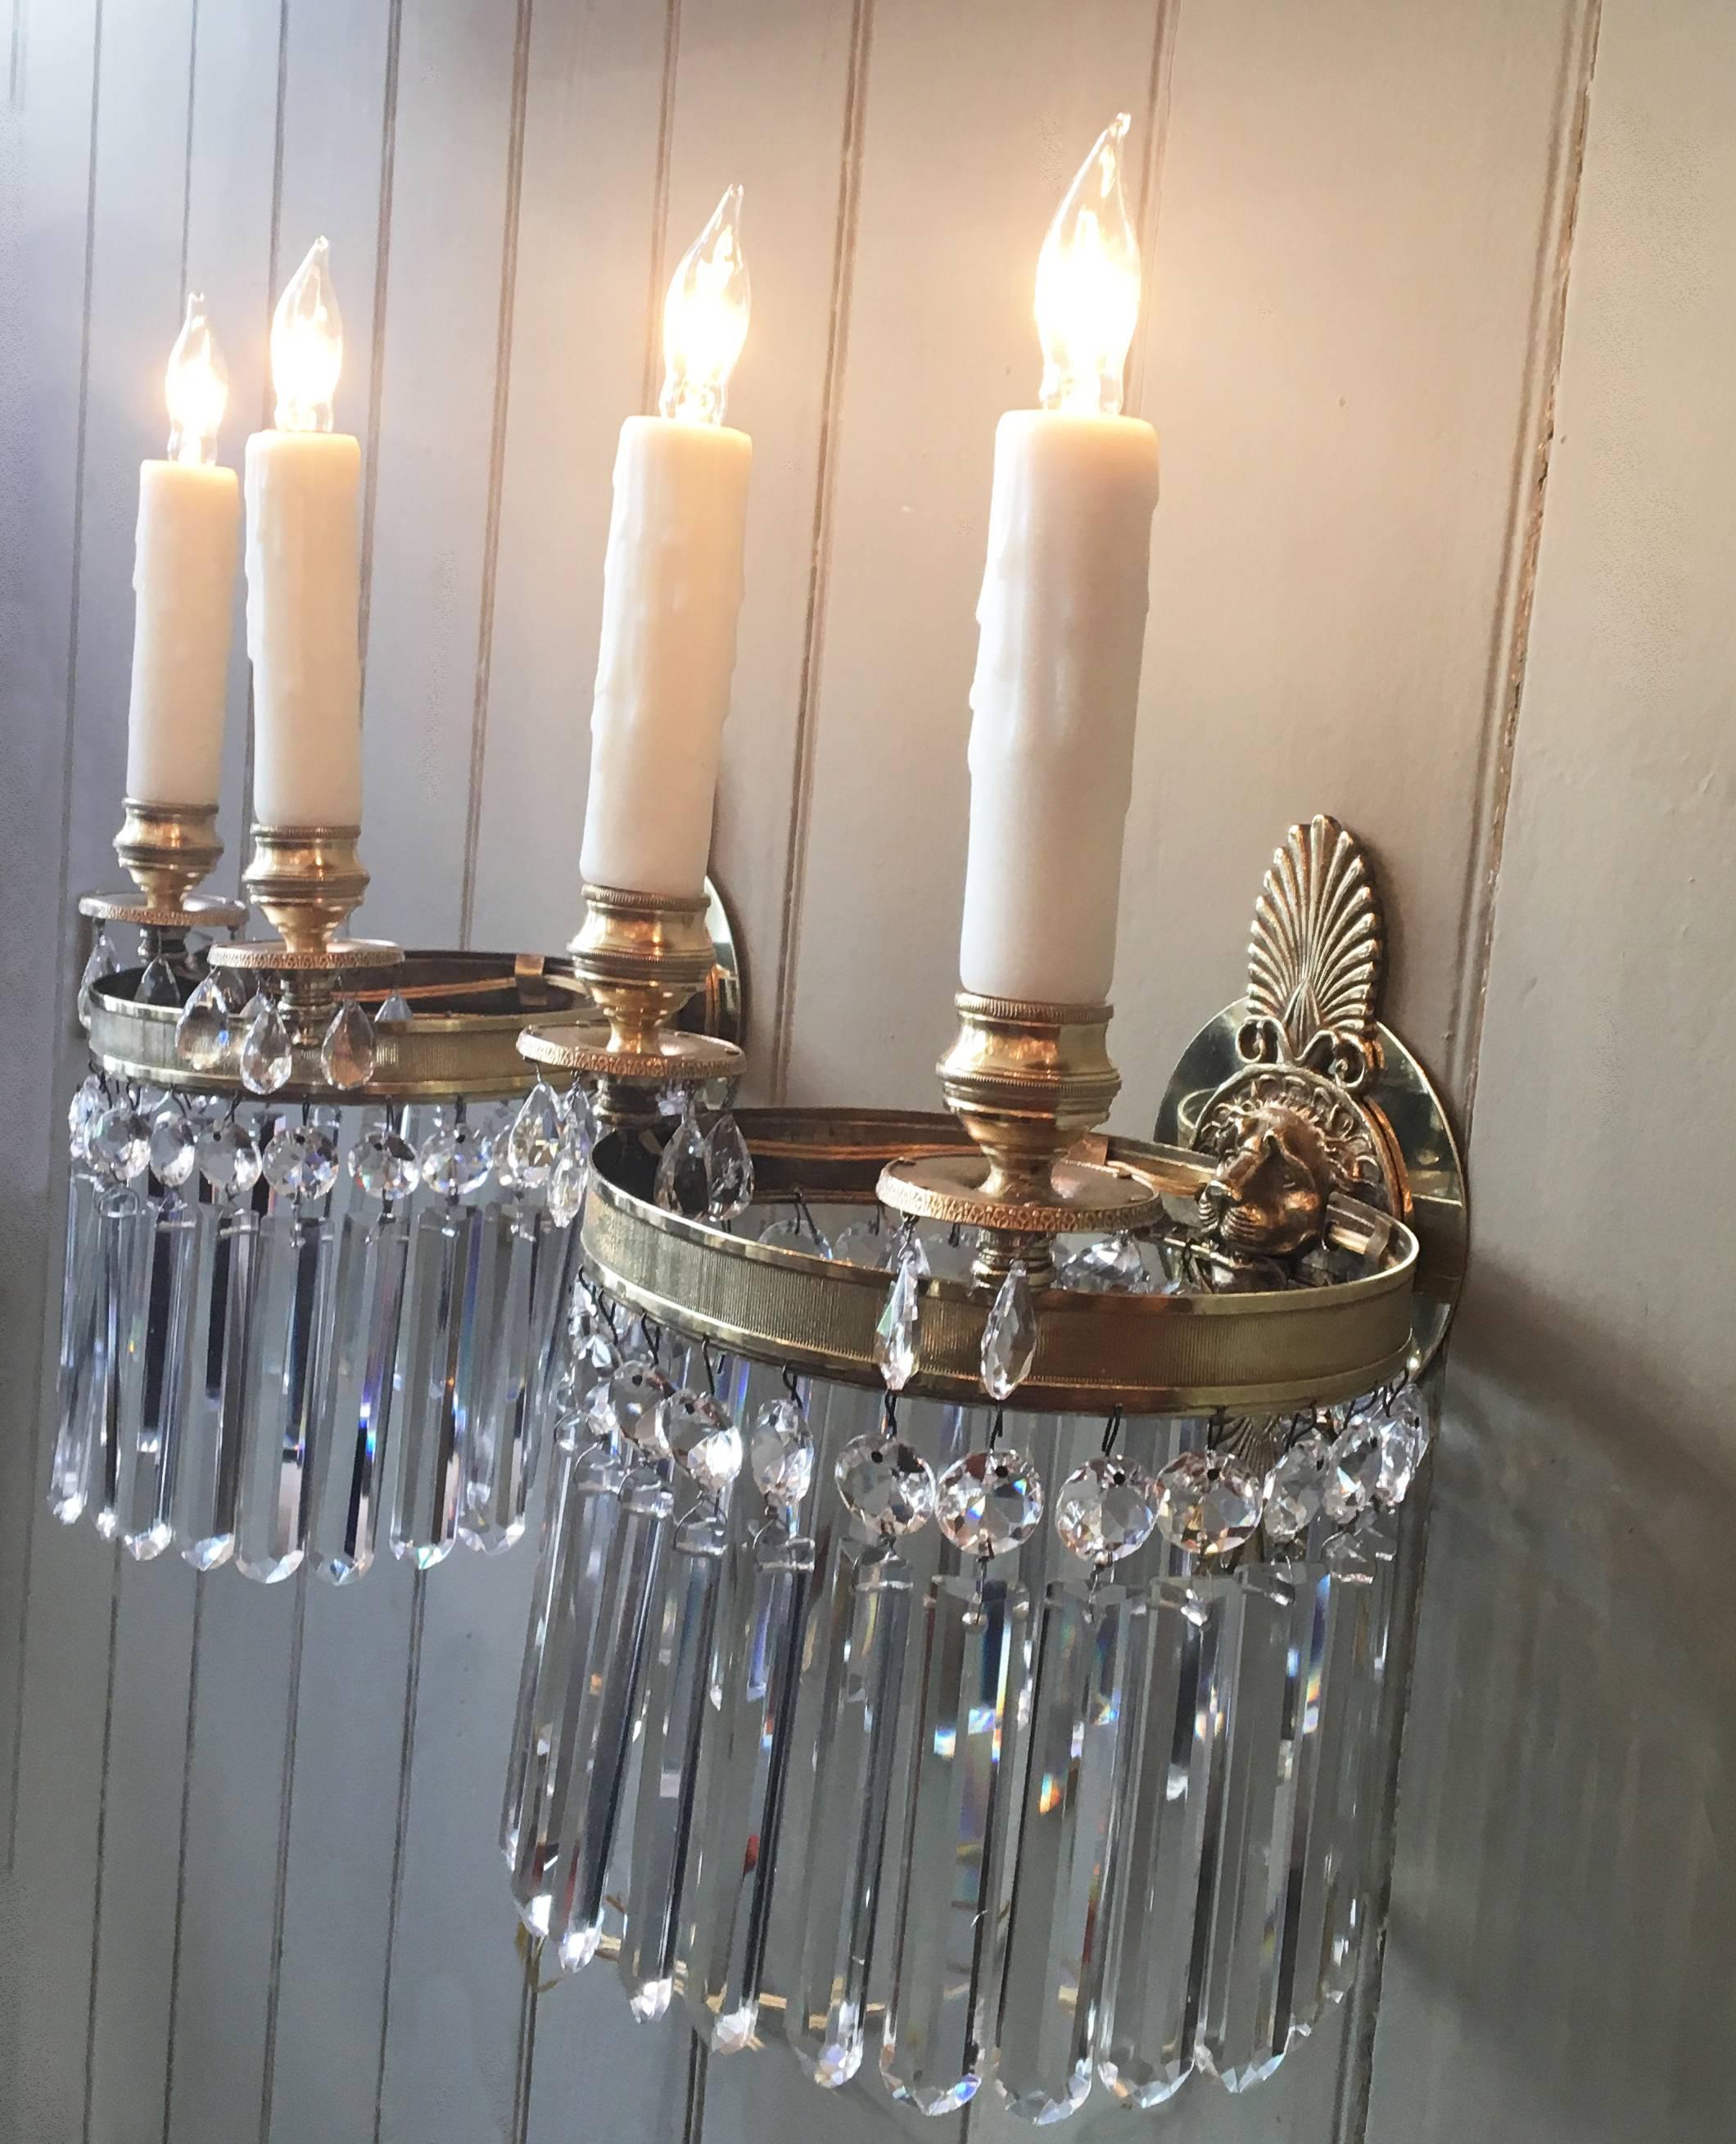 This lovely pair of early 19th century English Regency lion head and Athenian leaf sconces are made of brass and crystal. They are double armed, rewired, and electrified.